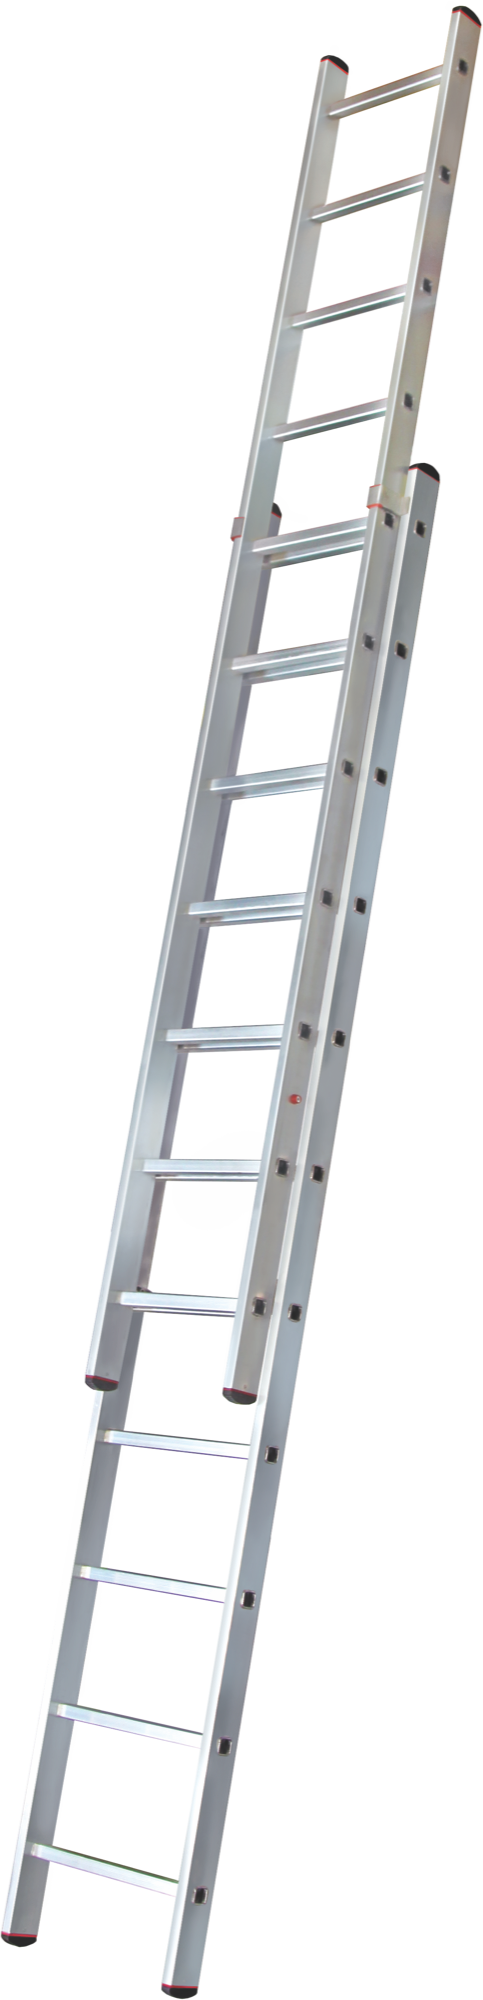 Two-section aluminum industrial extension rung ladder NV5260